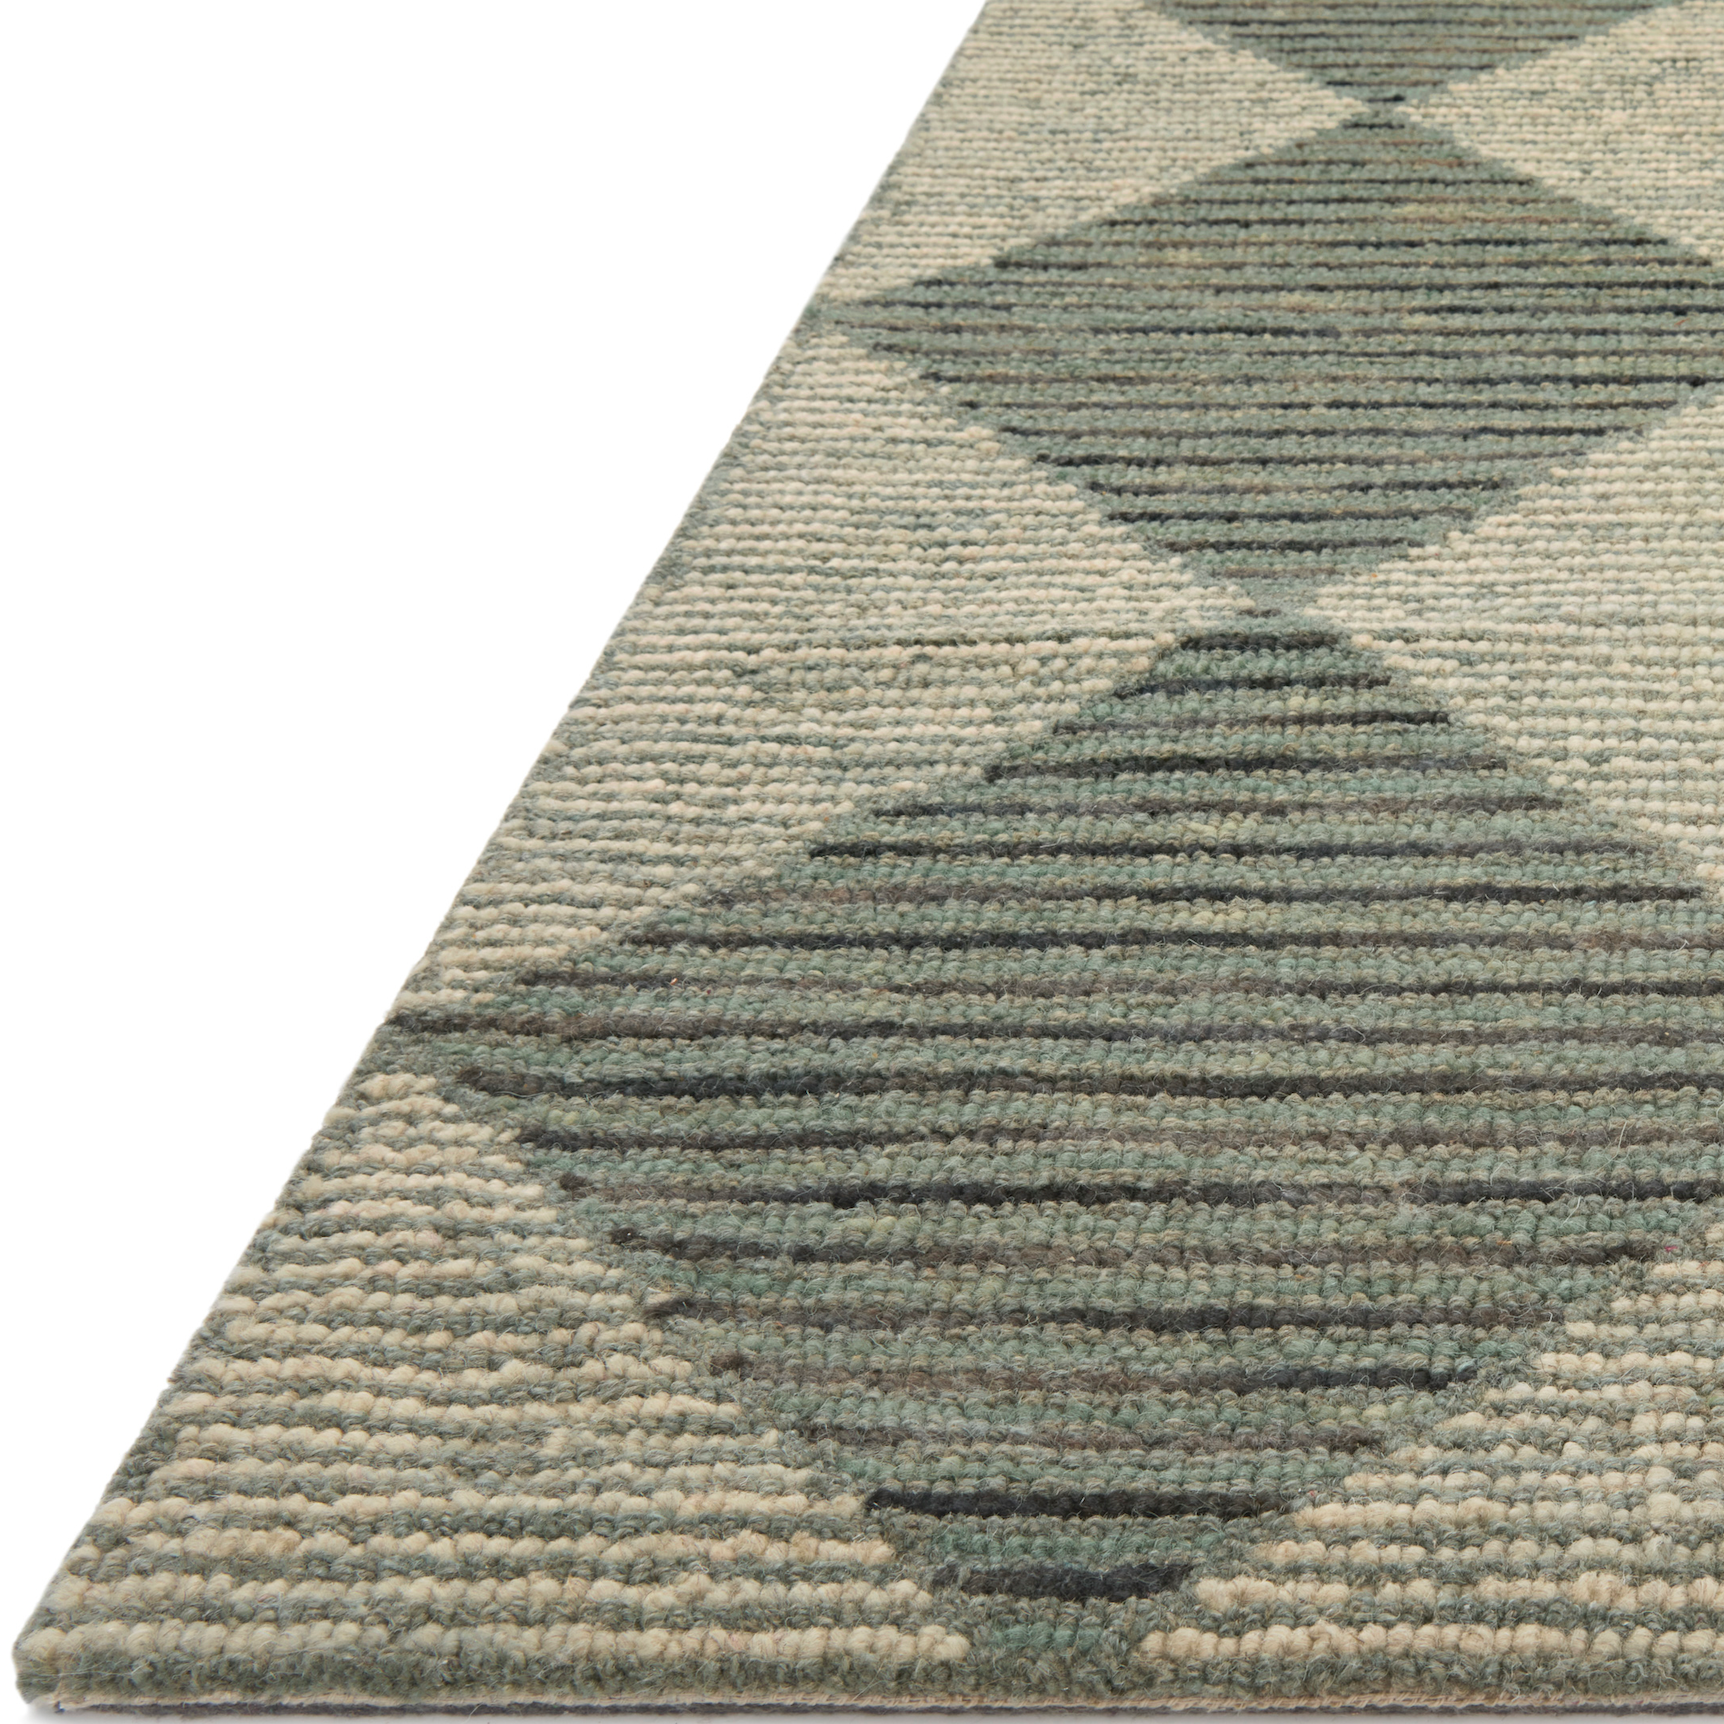 The Francis FRA-01 CJ Spa / Granite rug is a beautiful ode to Julia Marcum’s signature tile work. Perfectly designed — this rug mixes old traditions with fresh modern sensibility. Amethyst Home provides interior design services, furniture, rugs, and lighting in the Omaha metro area.